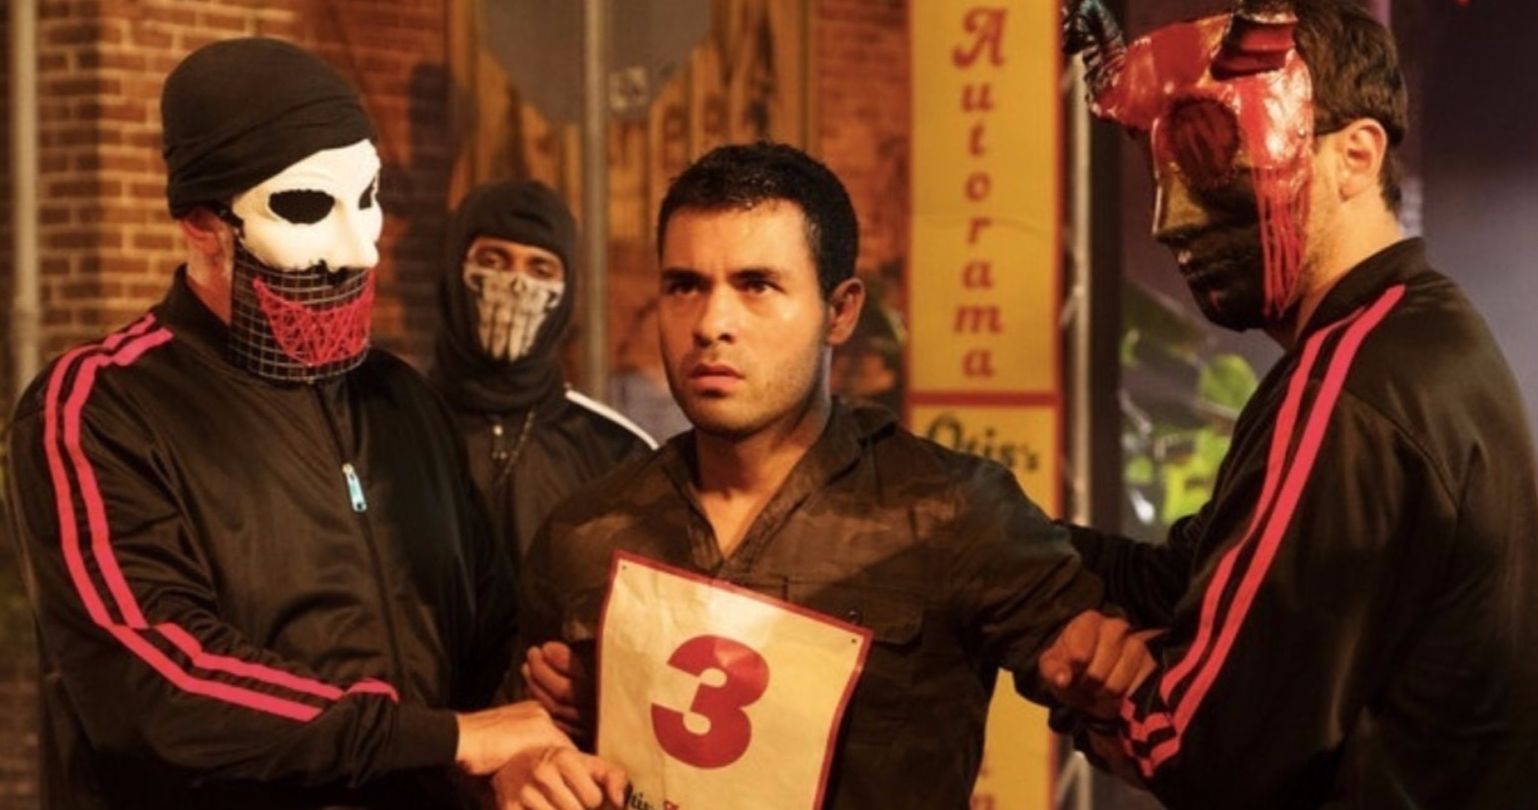 The Purge 5 Gets an Intriguing New Title, What Does It Mean?